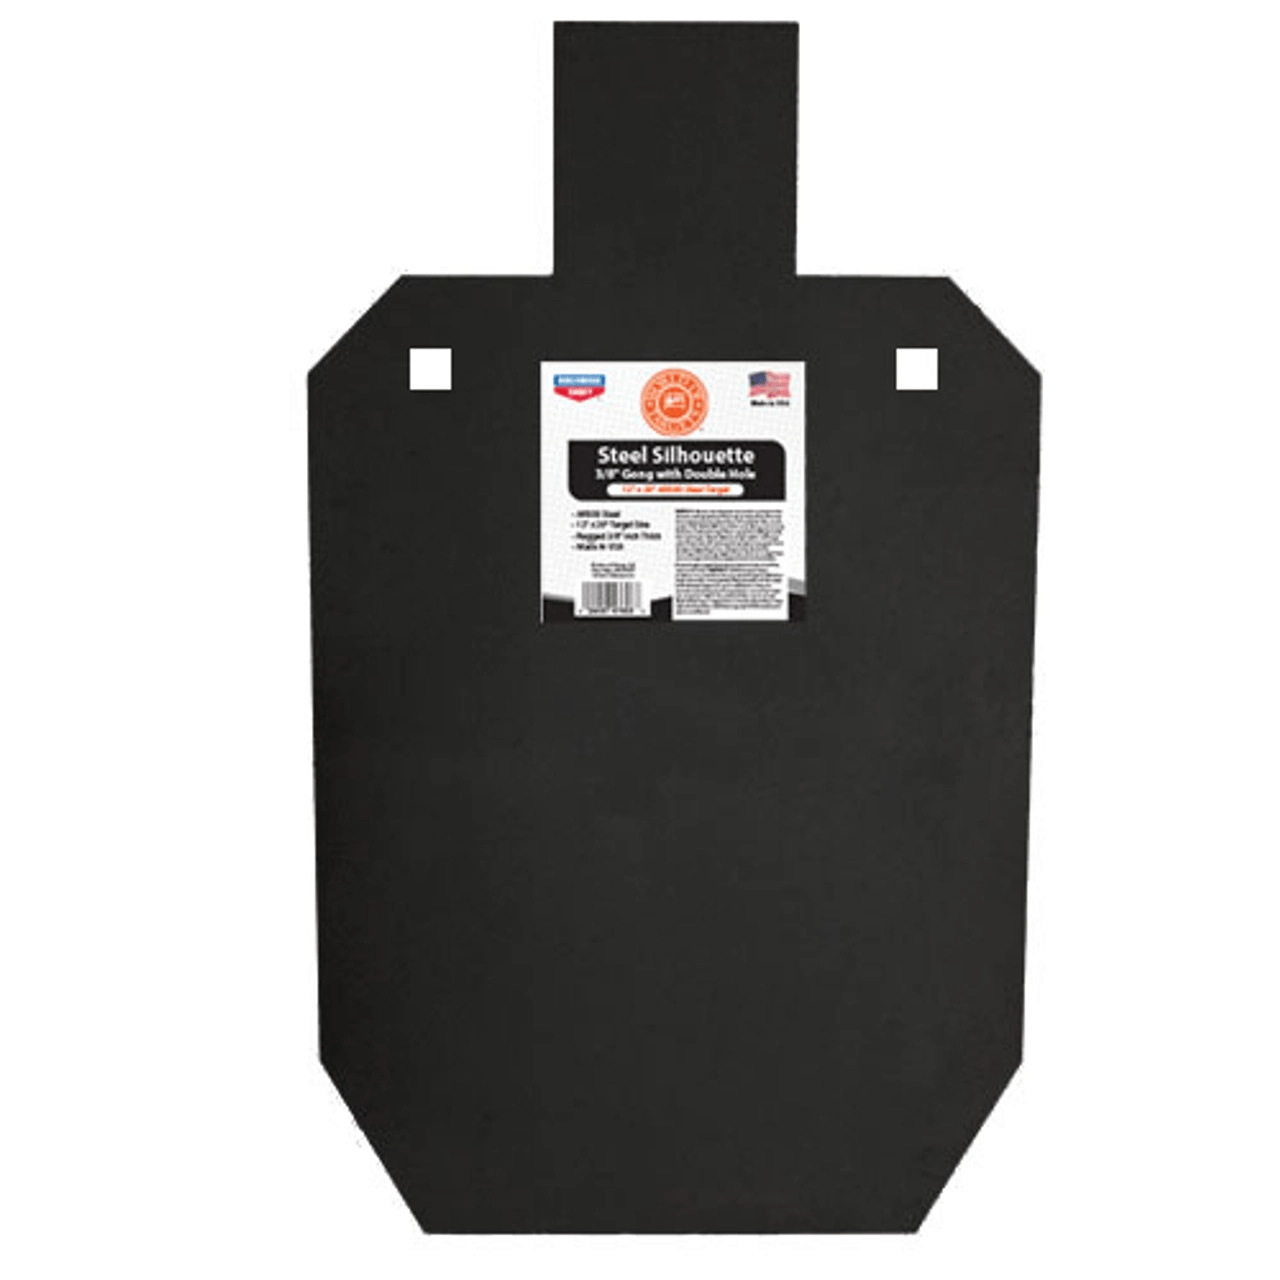 Birchwood Casey World of Targets 12x20 Steel Silhouette Target BC-47635 - Shooting Accessories